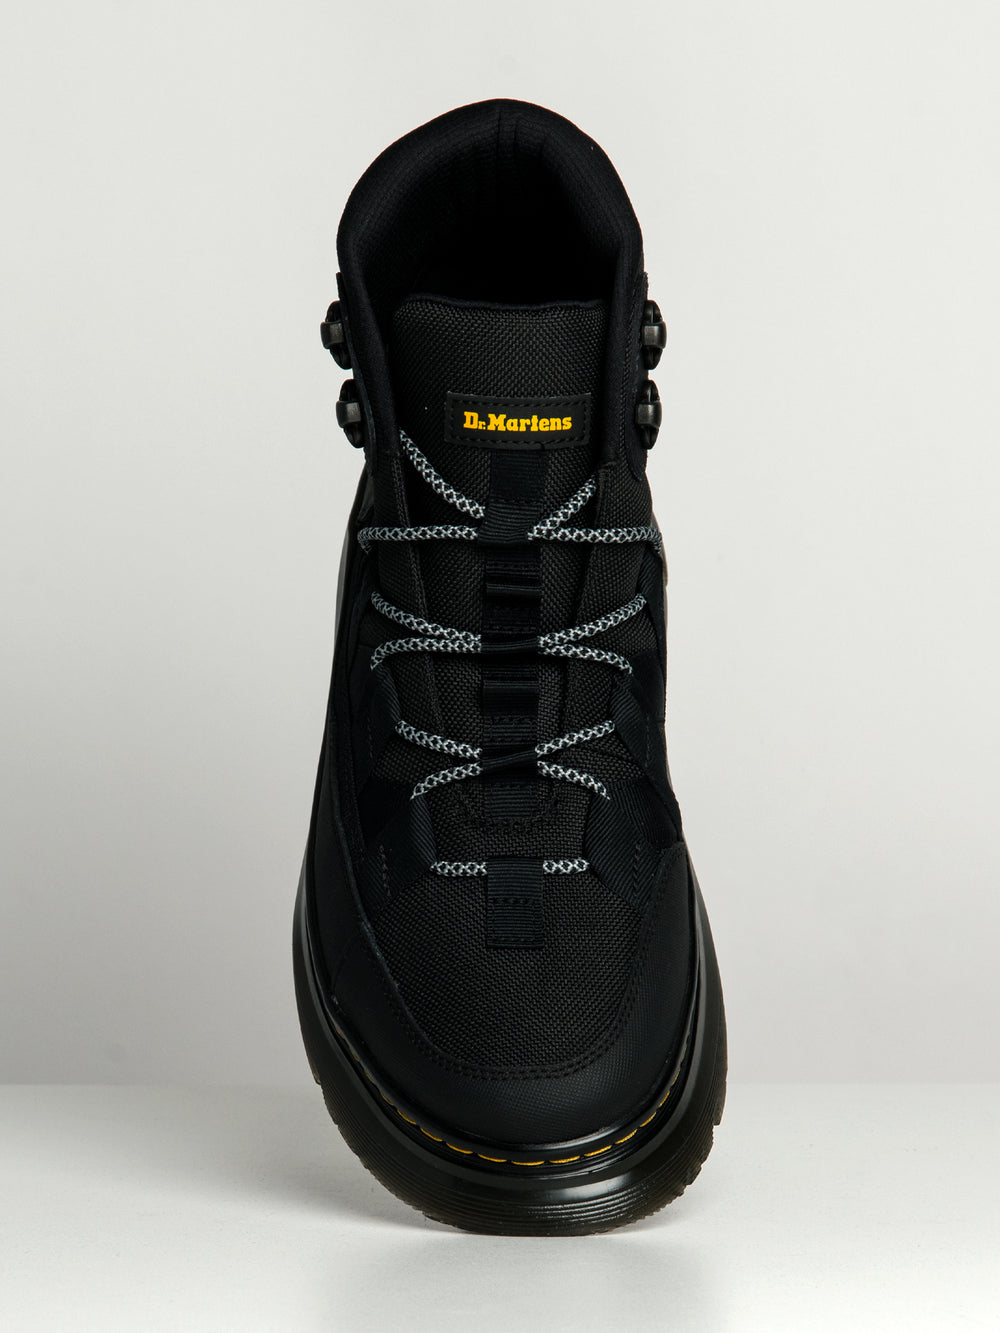 MENS DR MARTENS BOURY EXTRA TOUGH 50/50 BOOT - CLEARANCE